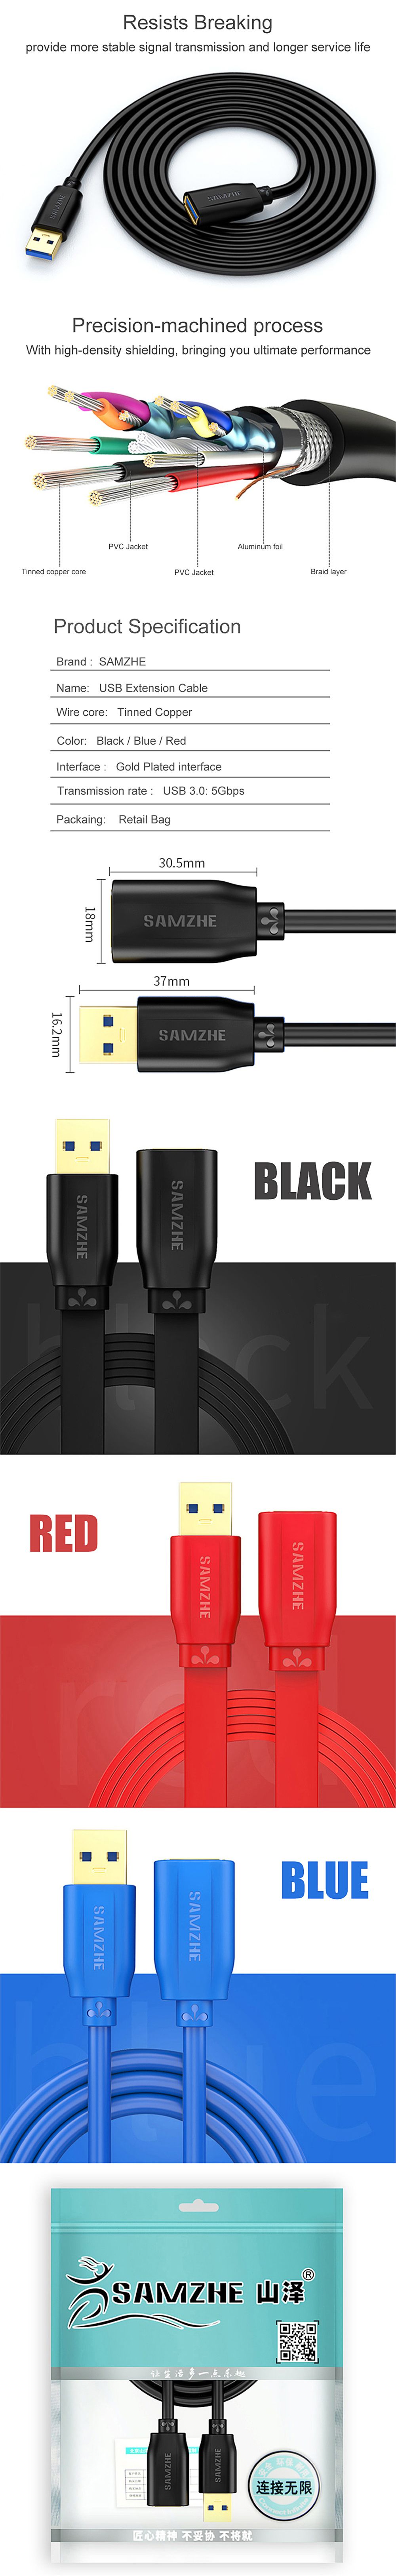 SAMZHE-USB-30-Extension-Cable-Round-head-USB-Male-to-Female-Cable-Data-Charging-Cable-Universal-for--1670285